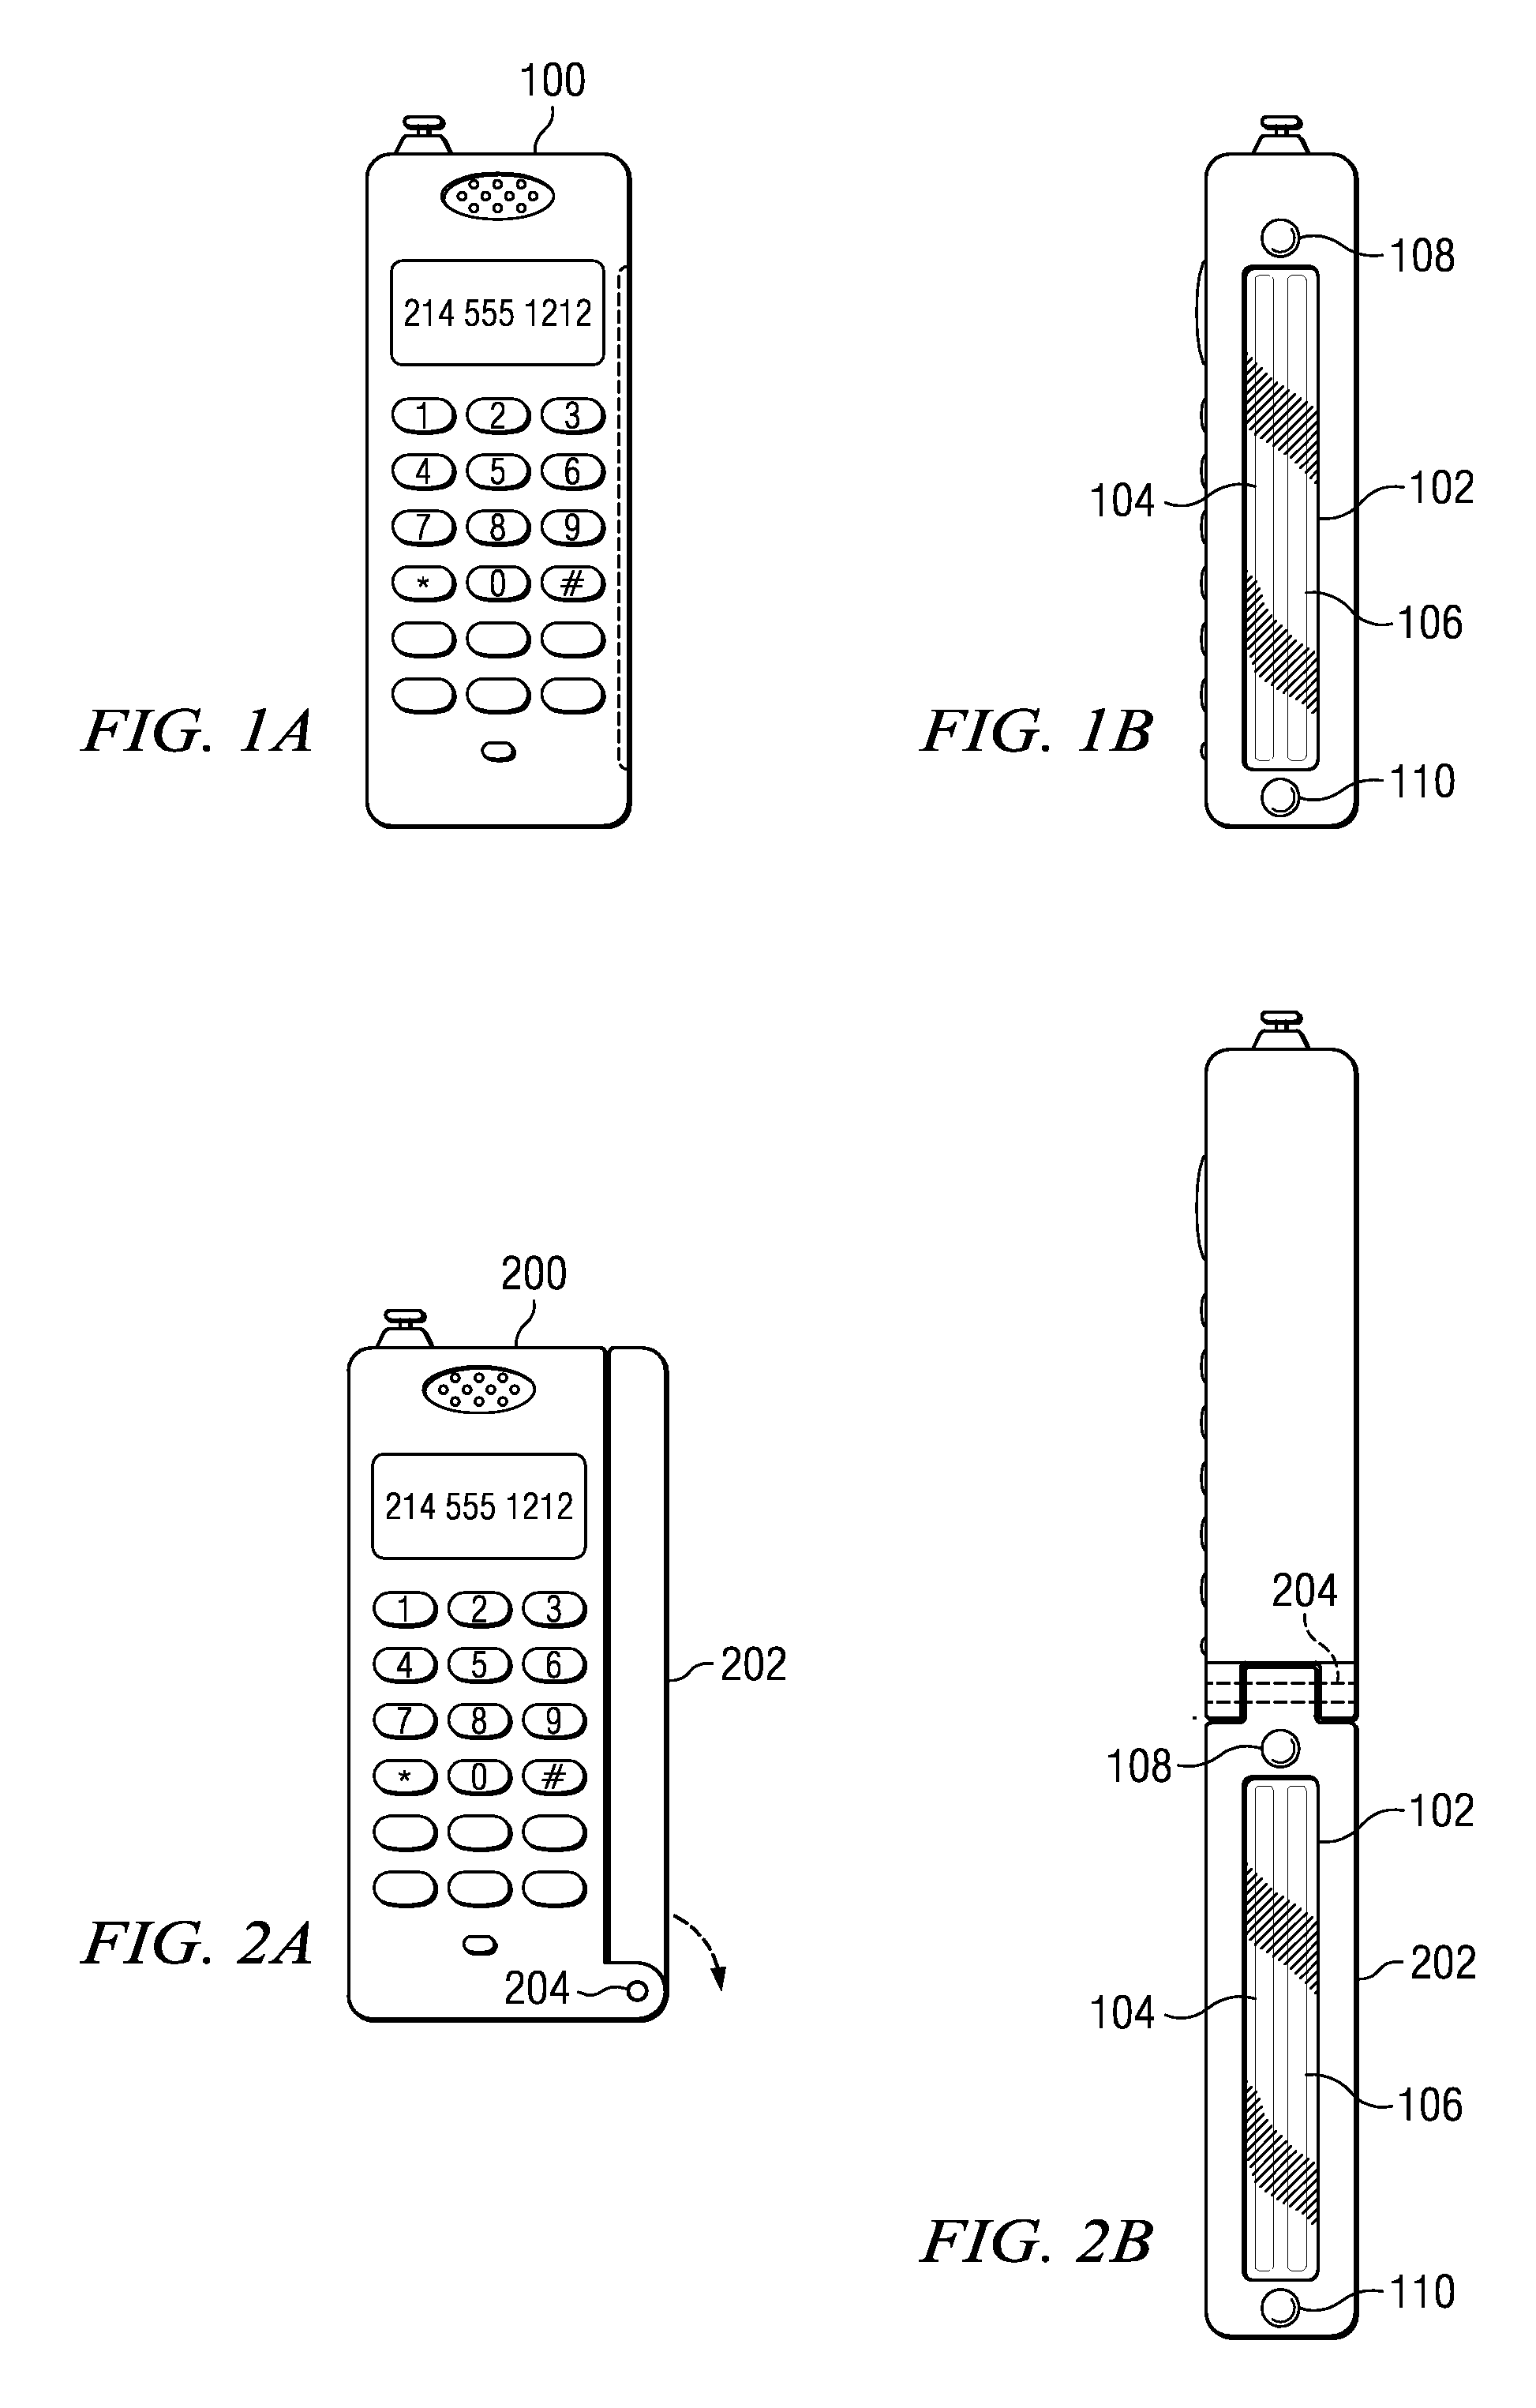 Cellular phone with scanning capability